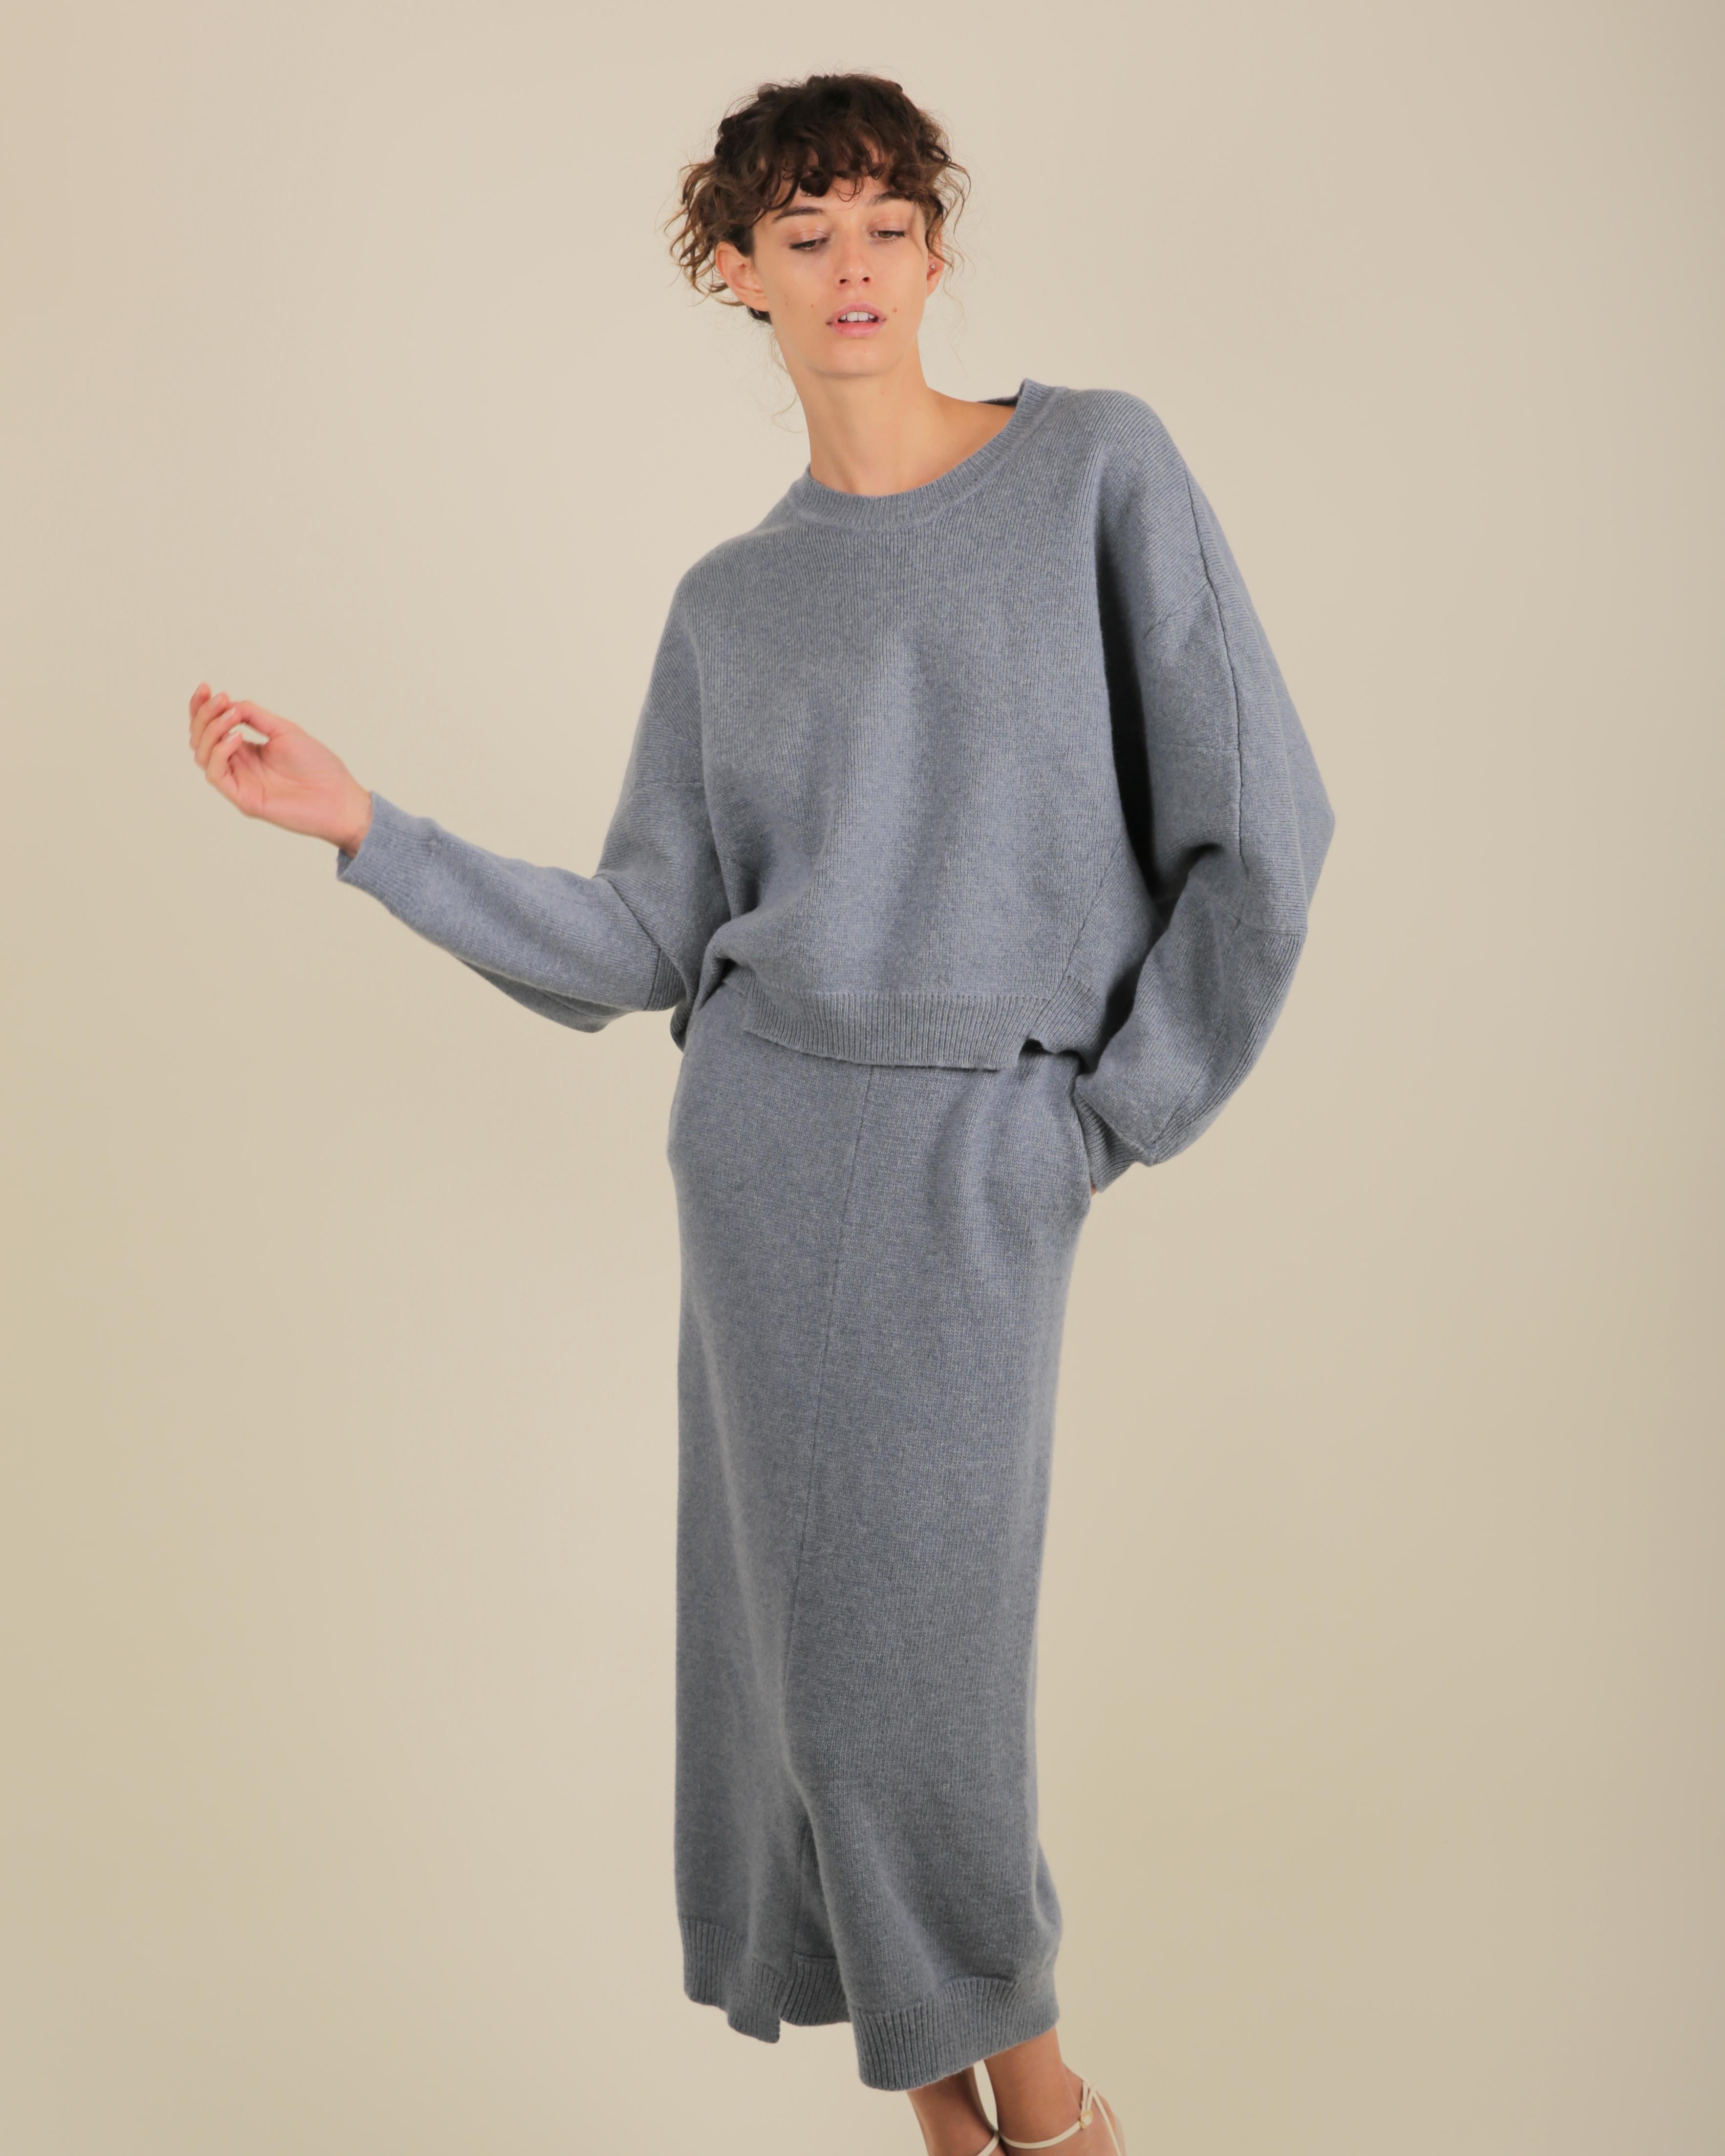 Stella McCartney Fall18 blue oversized wool alpaca matching sweater dress pants In Excellent Condition For Sale In Paris, FR